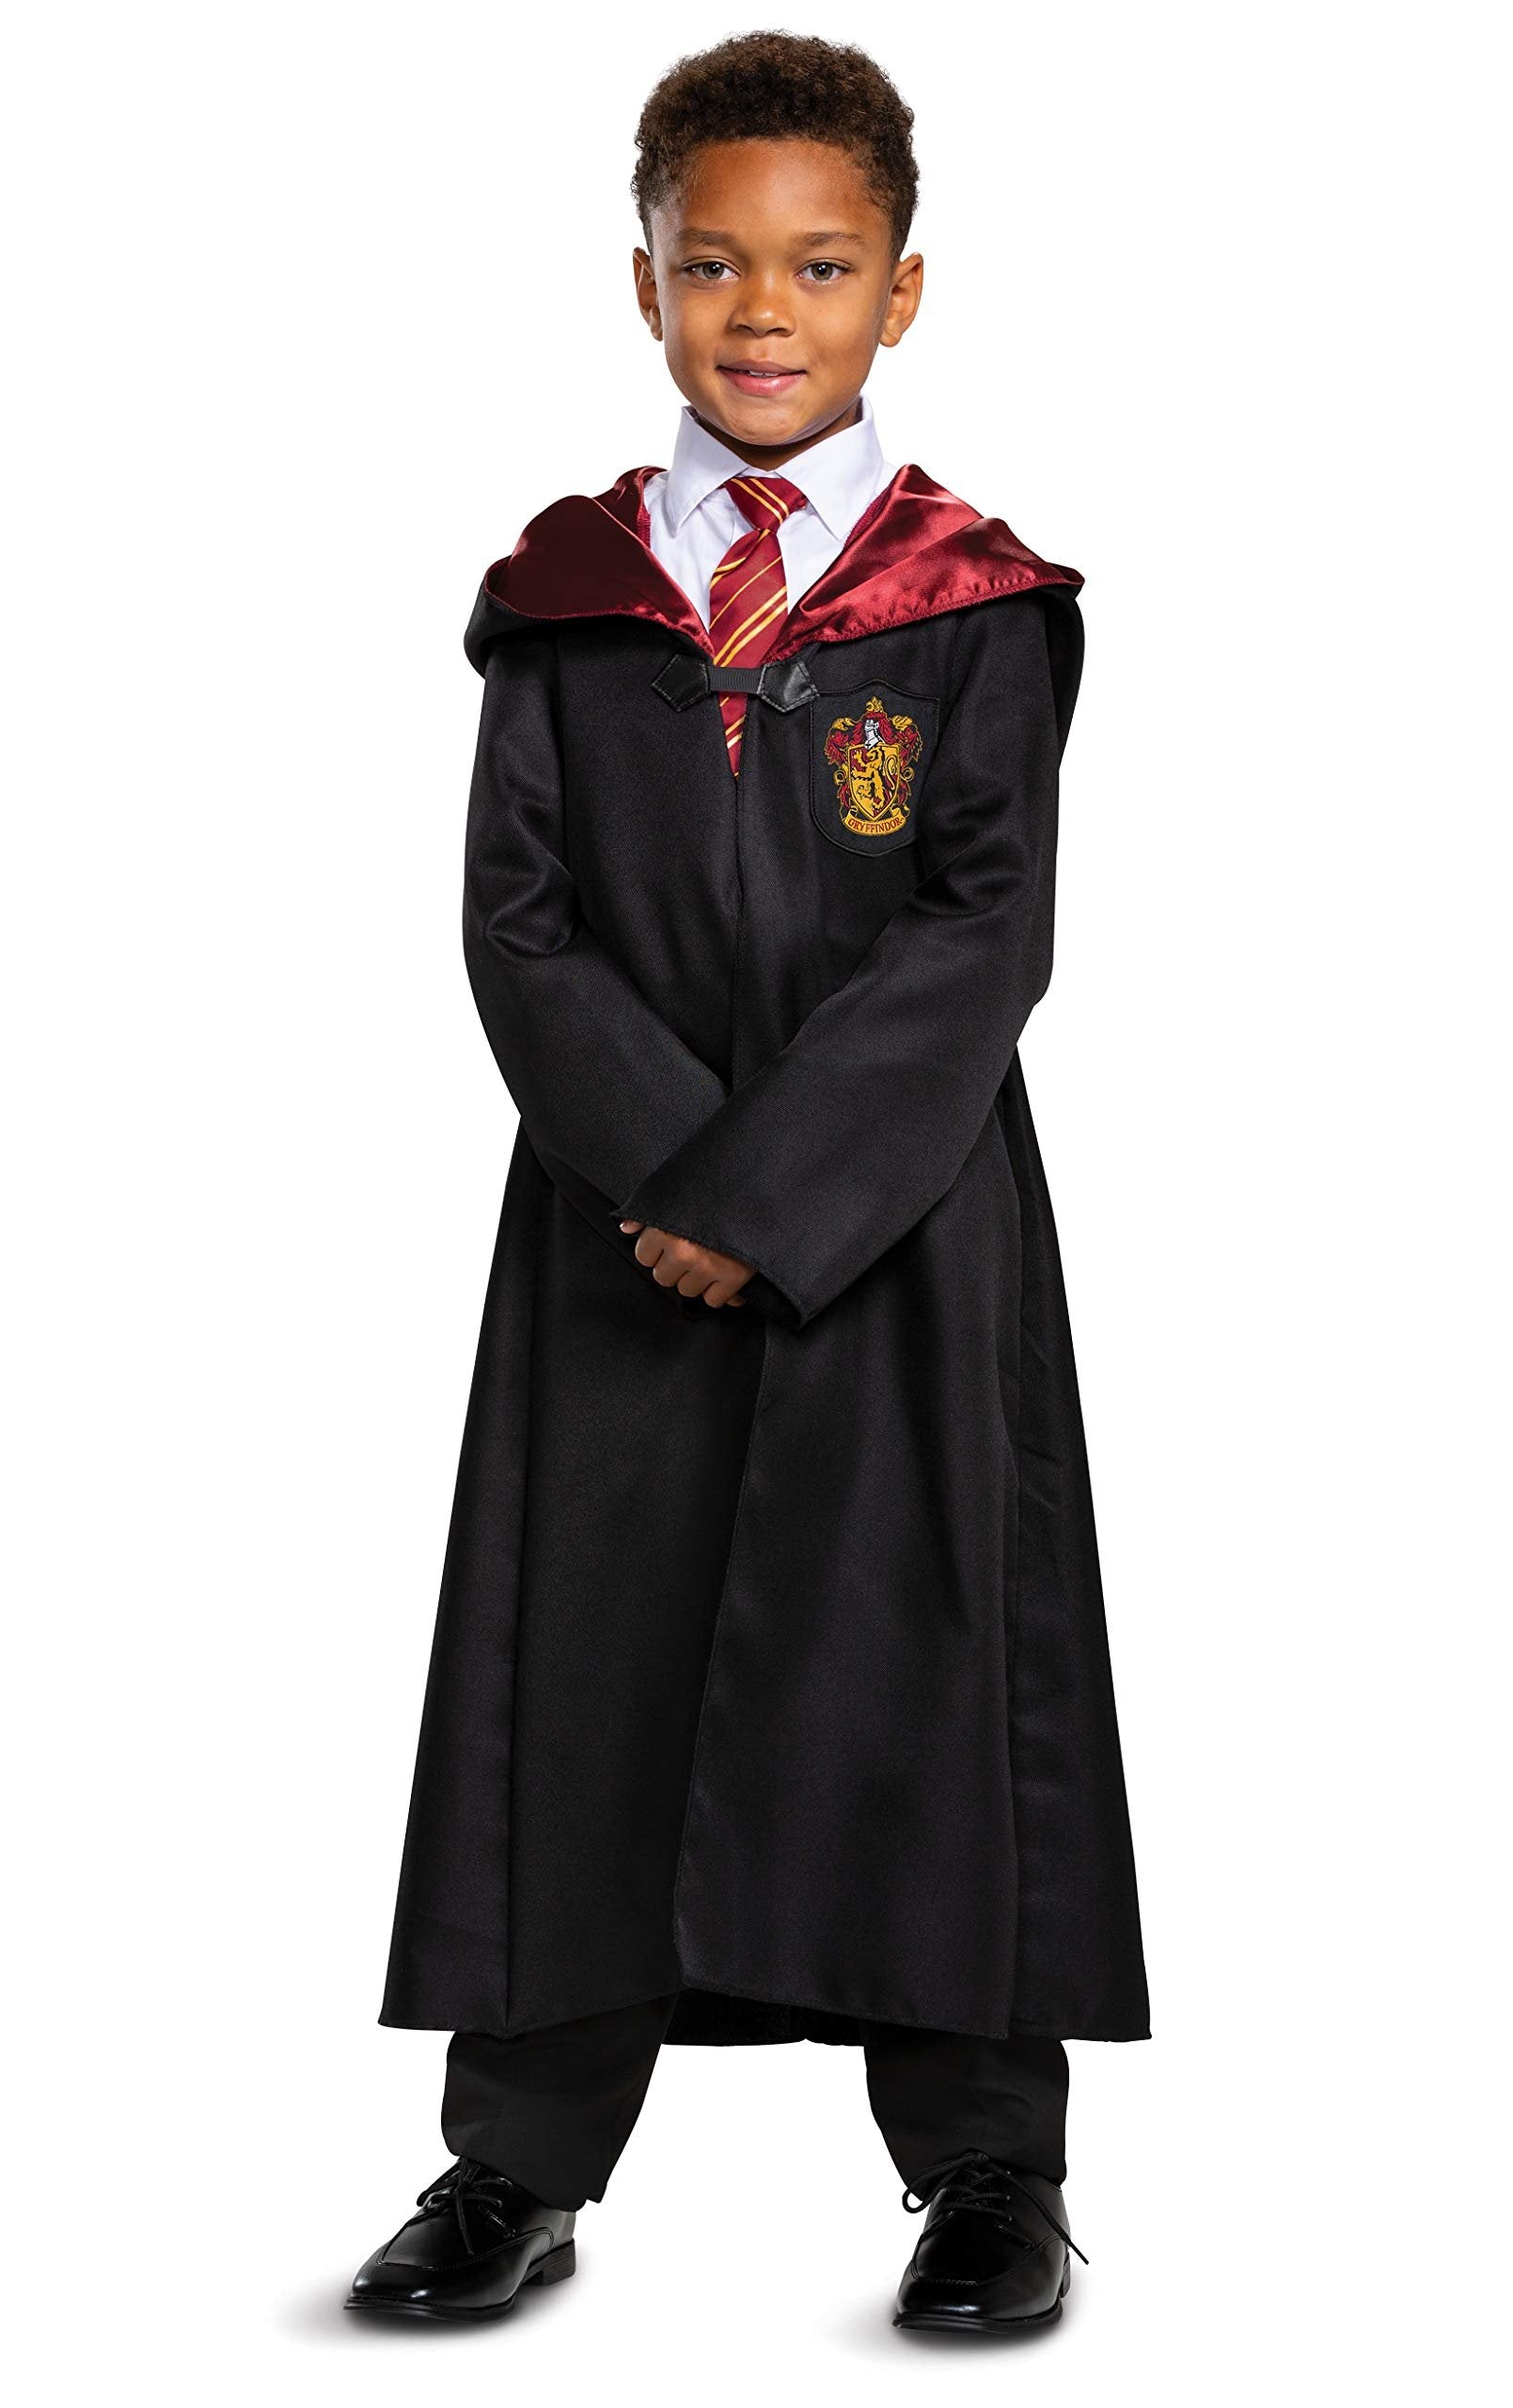 Disguise Harry Potter Robe - Classic Kids Size Black & Red - Official Hogwarts Costume - Large (10-12)